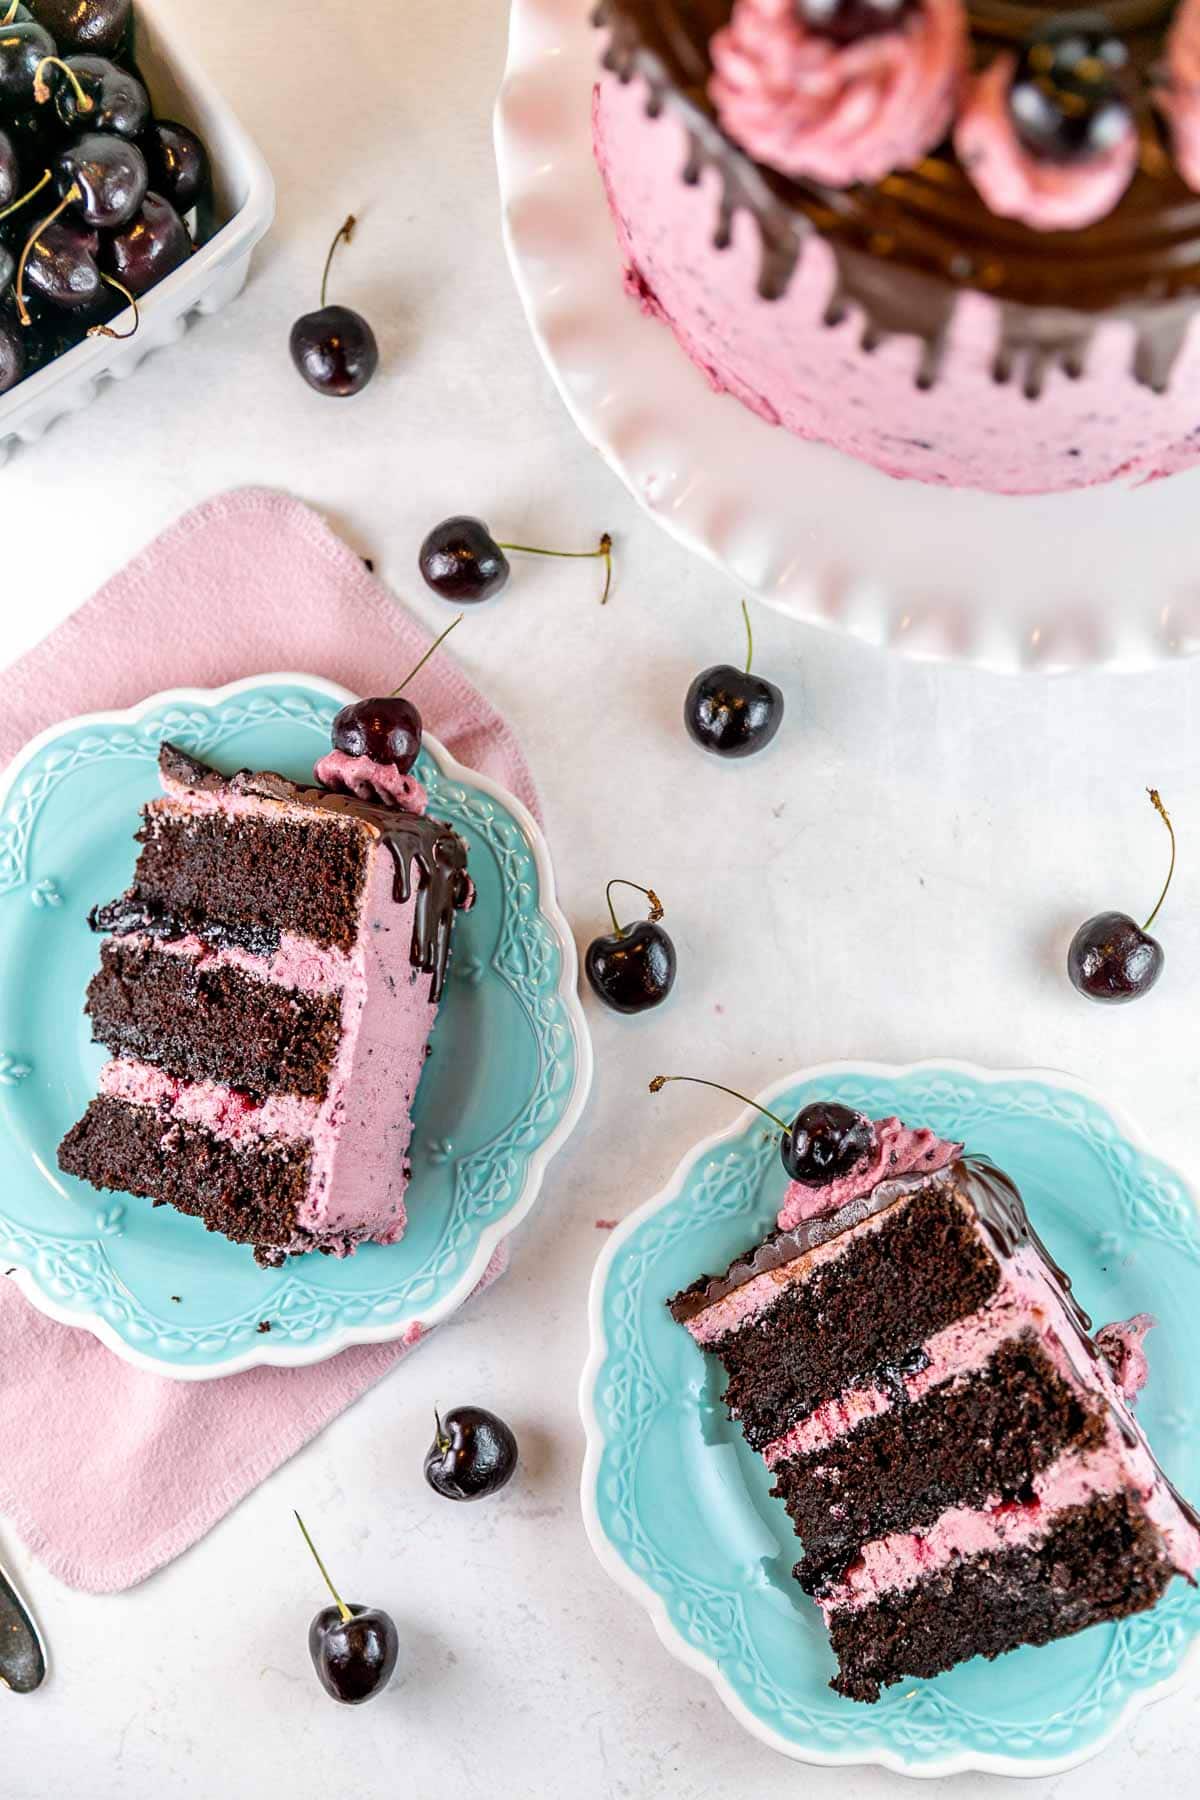 two slices of cherry chocolate cake on bright blue dessert plates